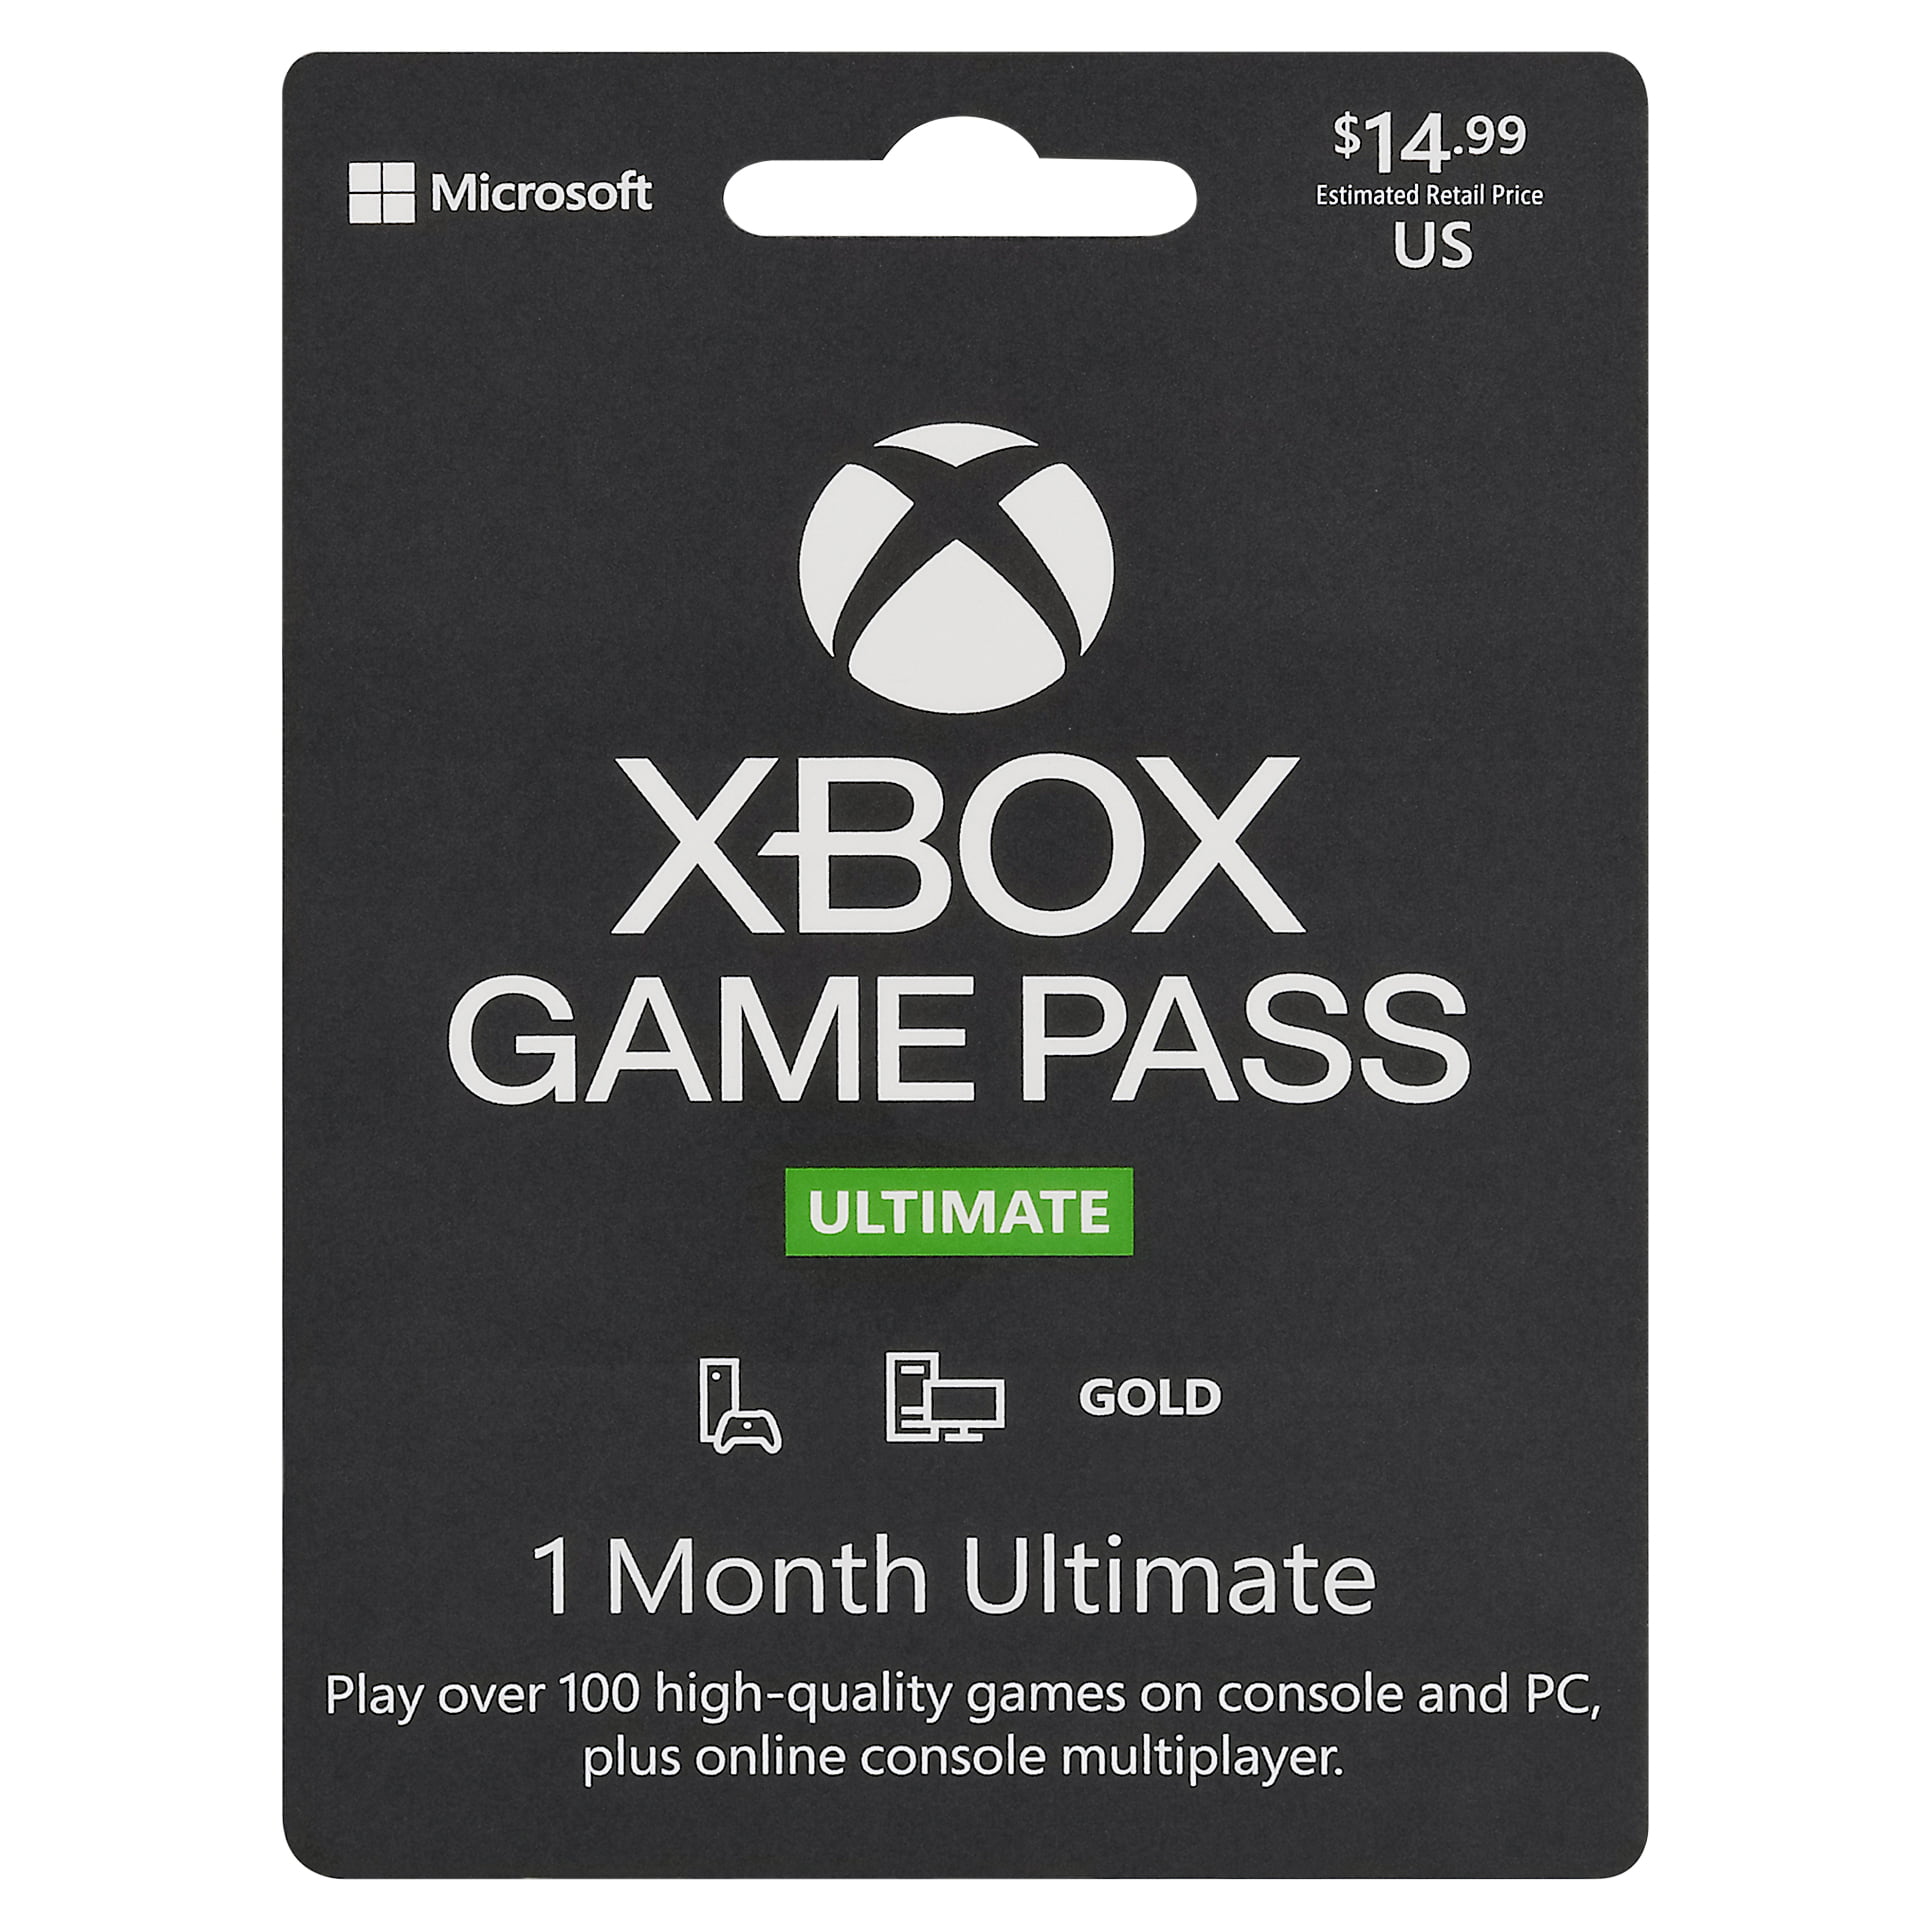 Wario64 on X: Xbox Ultimate Game Pass 1-month sub is $1 on XBL, includes Game  Pass for PC, Xbox One, and Xbox Live Gold. Purchasing the $1 plan will  upgrade your existing